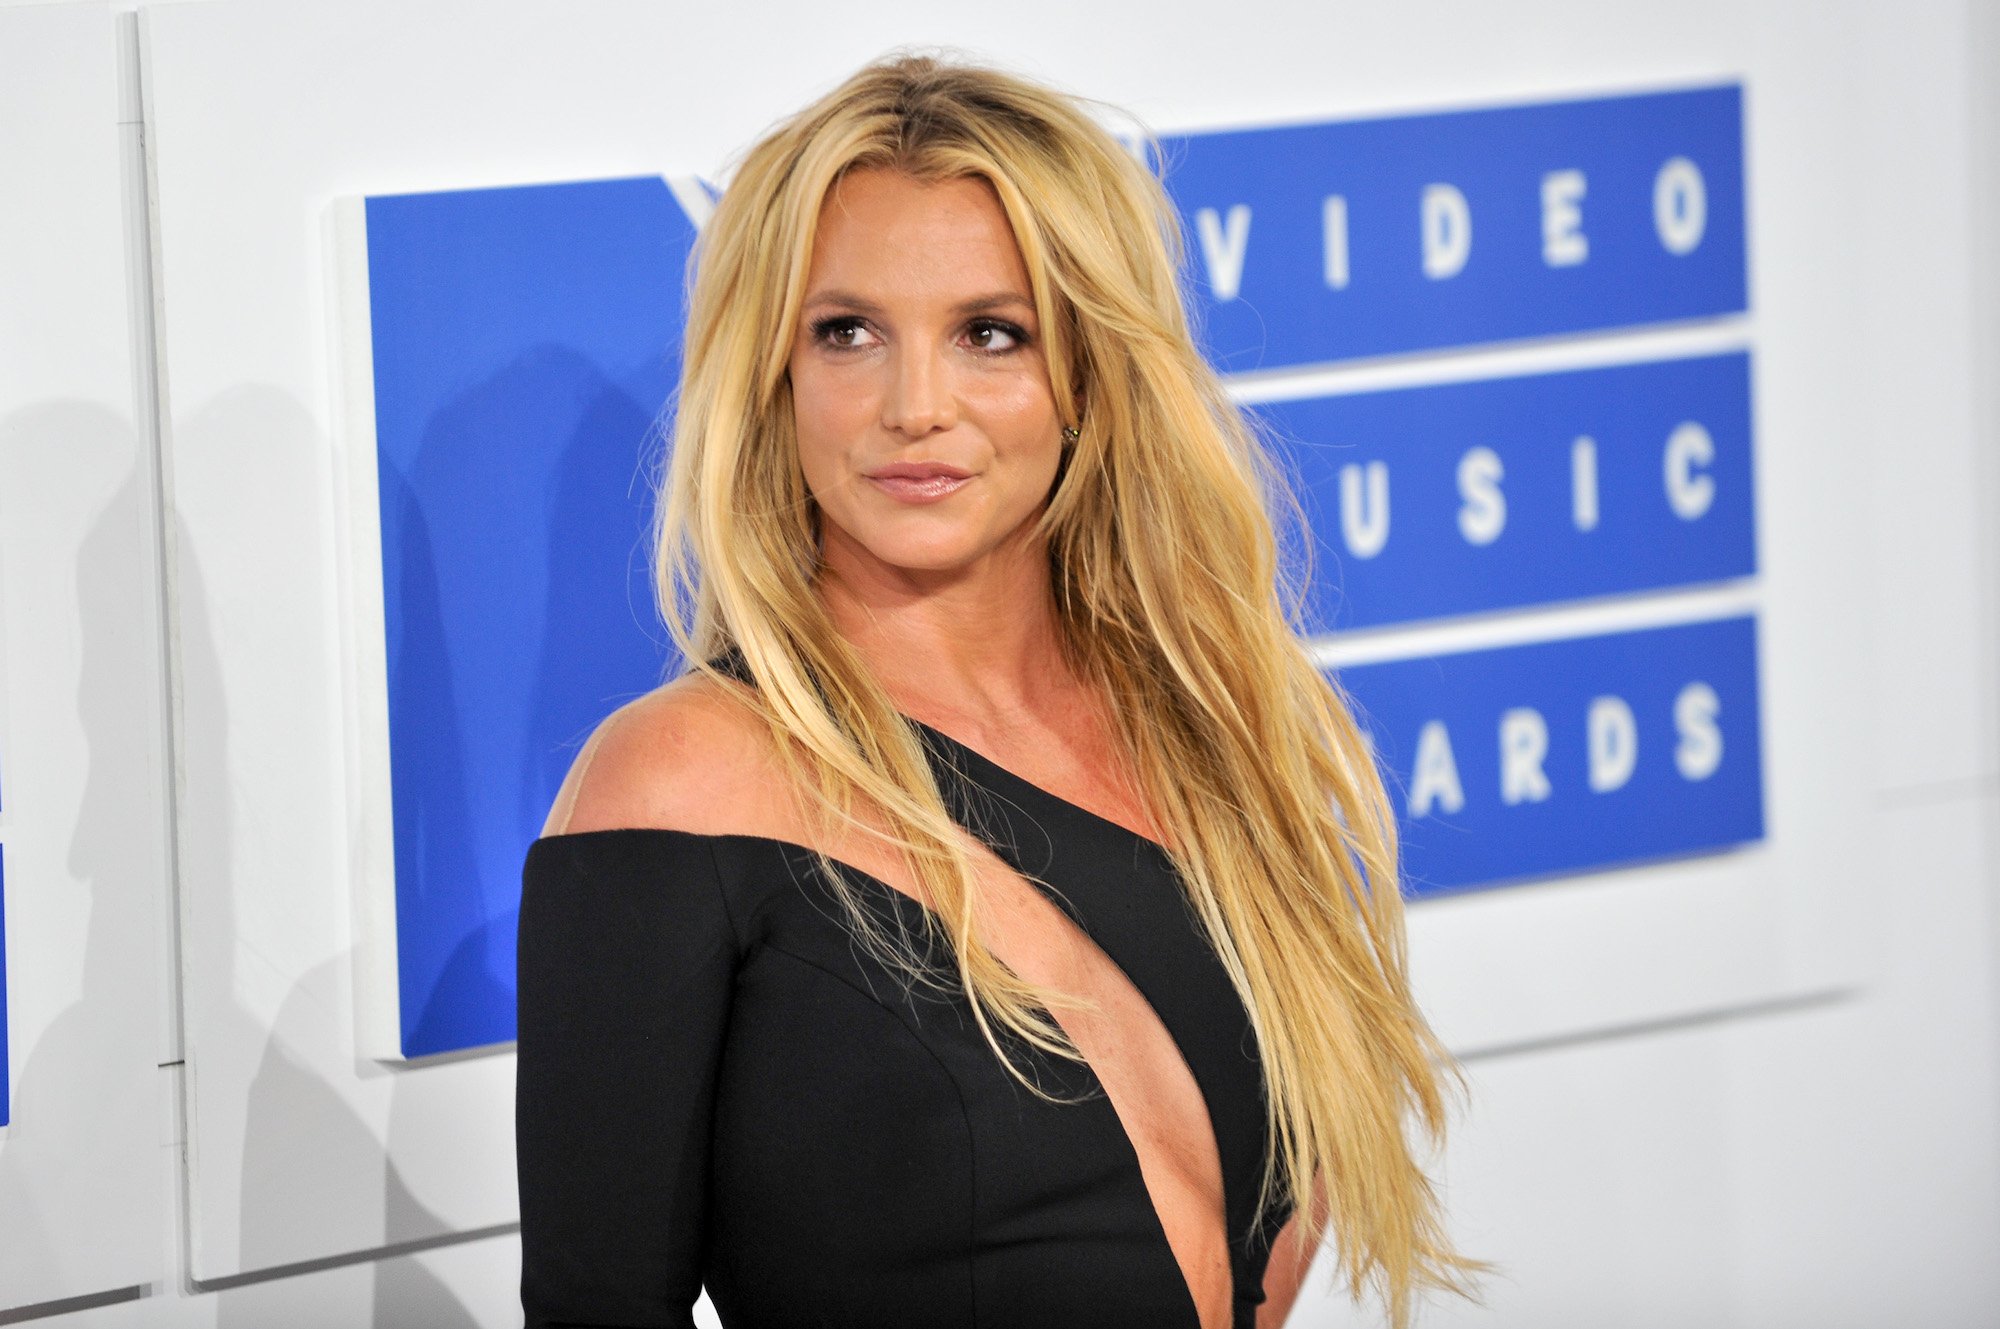 Is Britney Spears Involved In The New Netflix Documentary ‘Britney vs. Spears’?